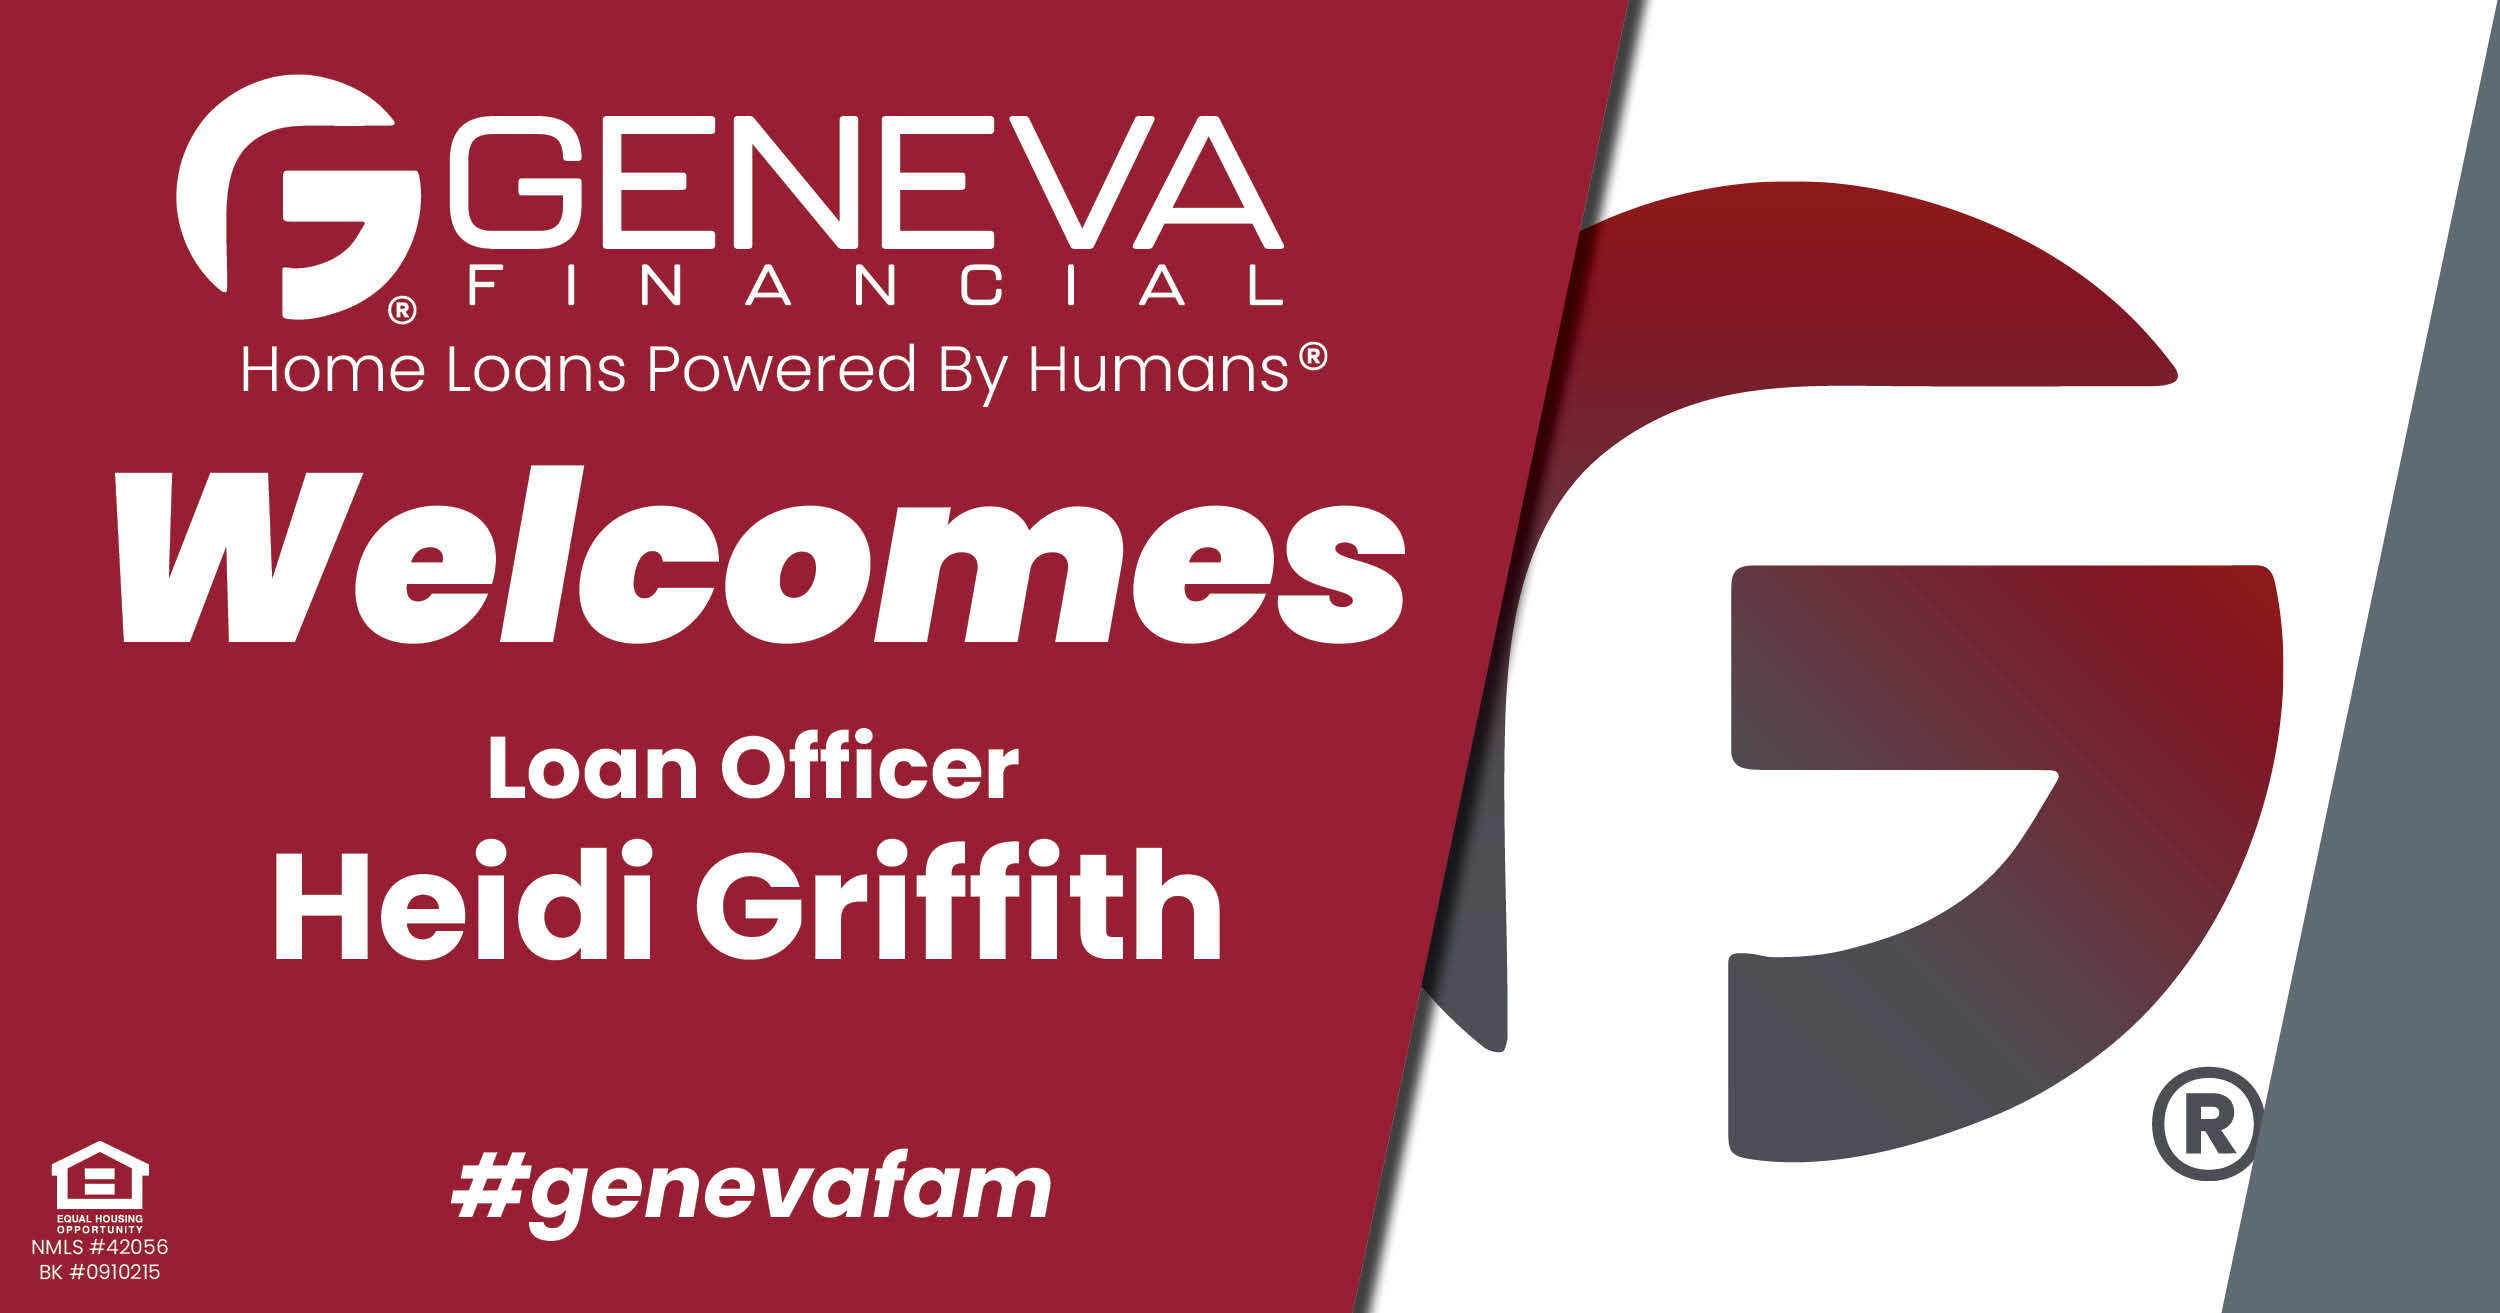 Geneva Financial Welcomes New Loan Officer Heidi Griffith to Las Vegas, Nevada – Home Loans Powered by Humans®.